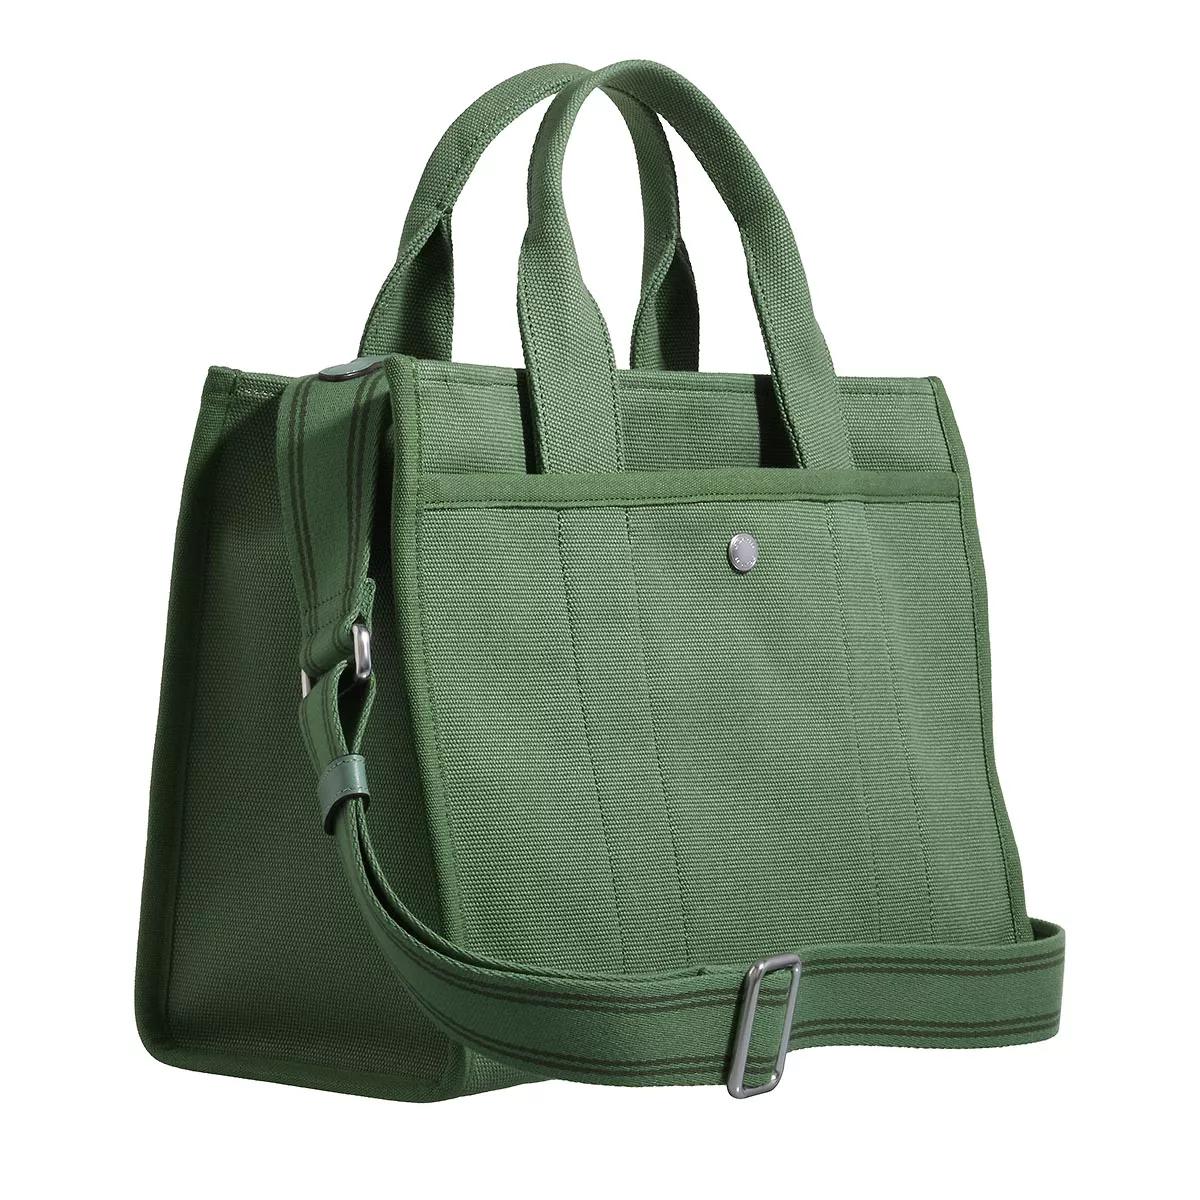 Coach Totes Cargo Tote in groen